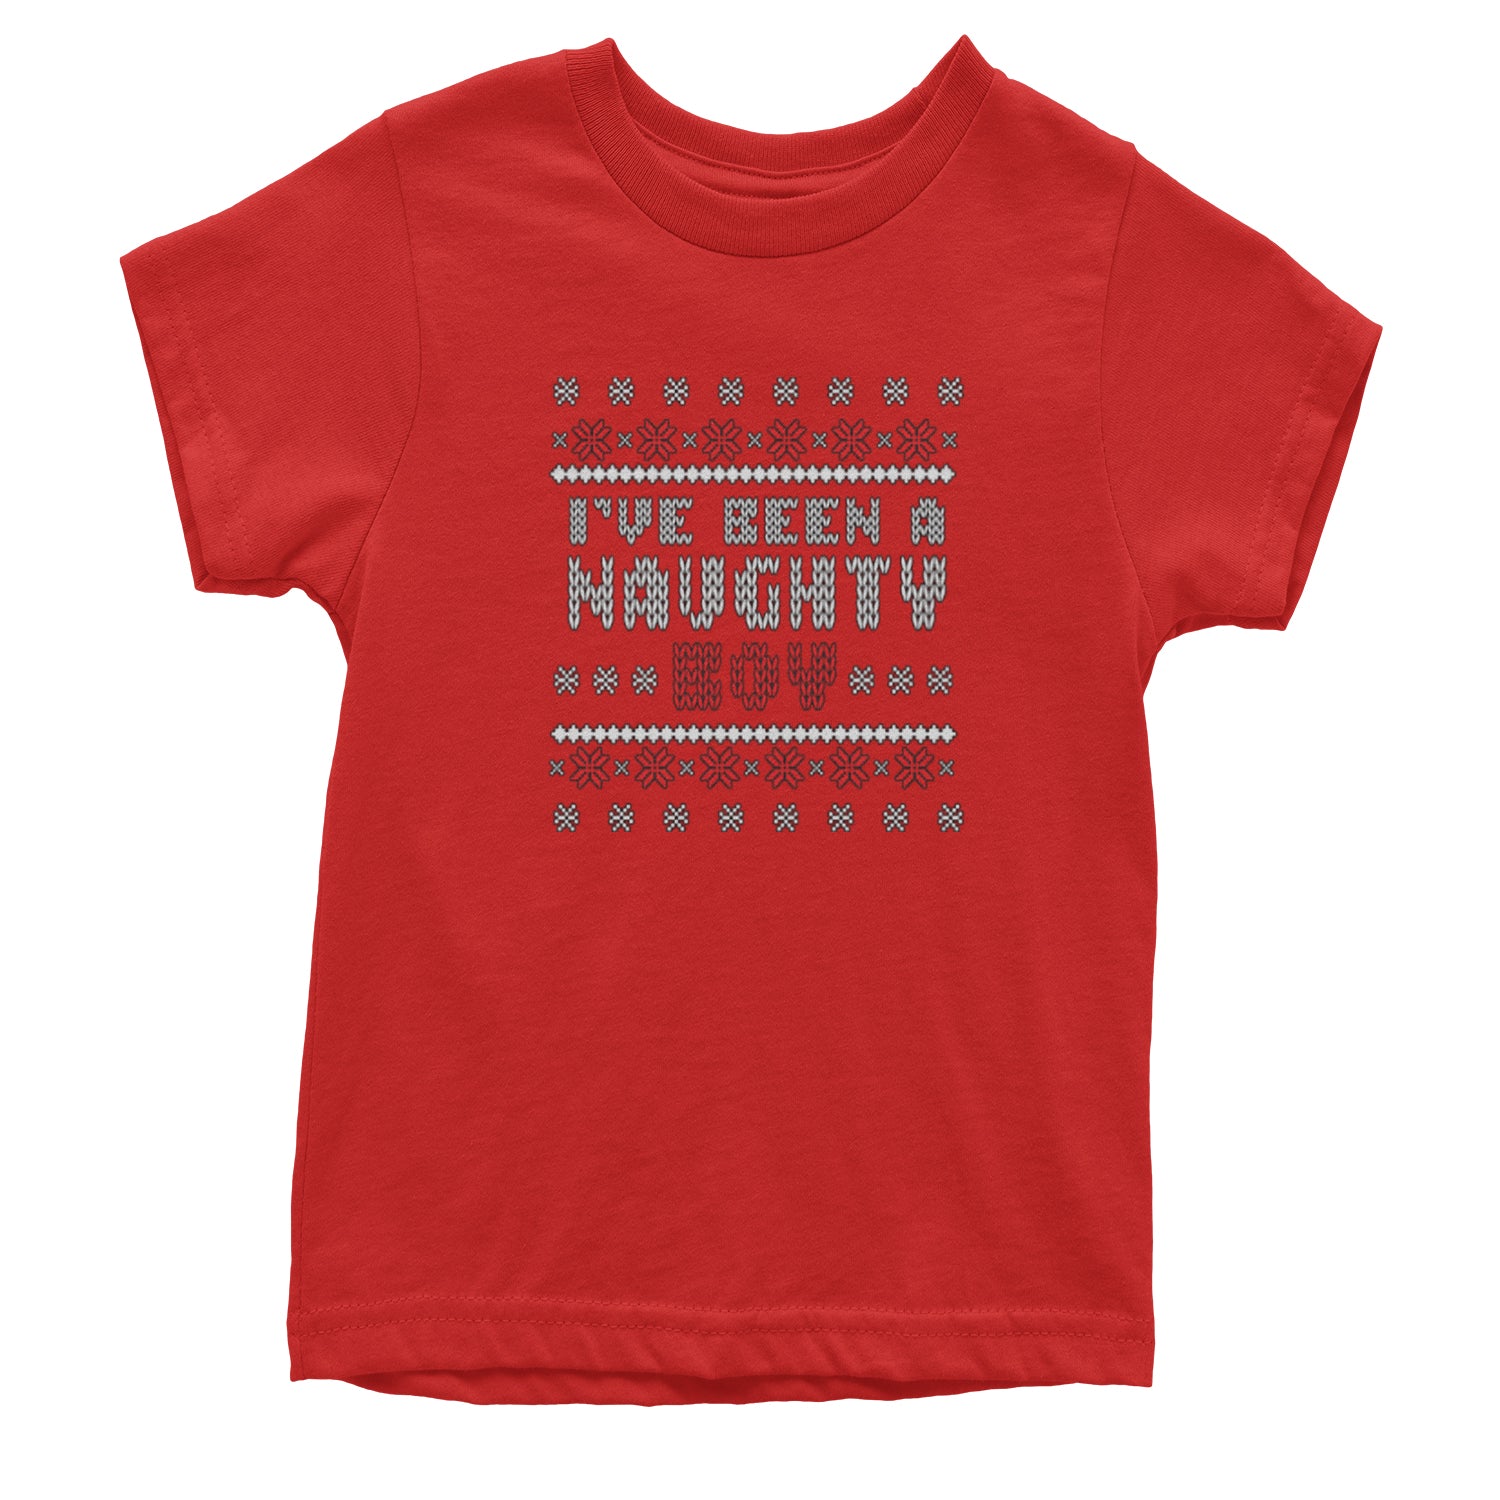 I've Been A Naughty Boy Ugly Christmas Youth T-shirt list, naughty, nice, santa, ugly, xmas by Expression Tees